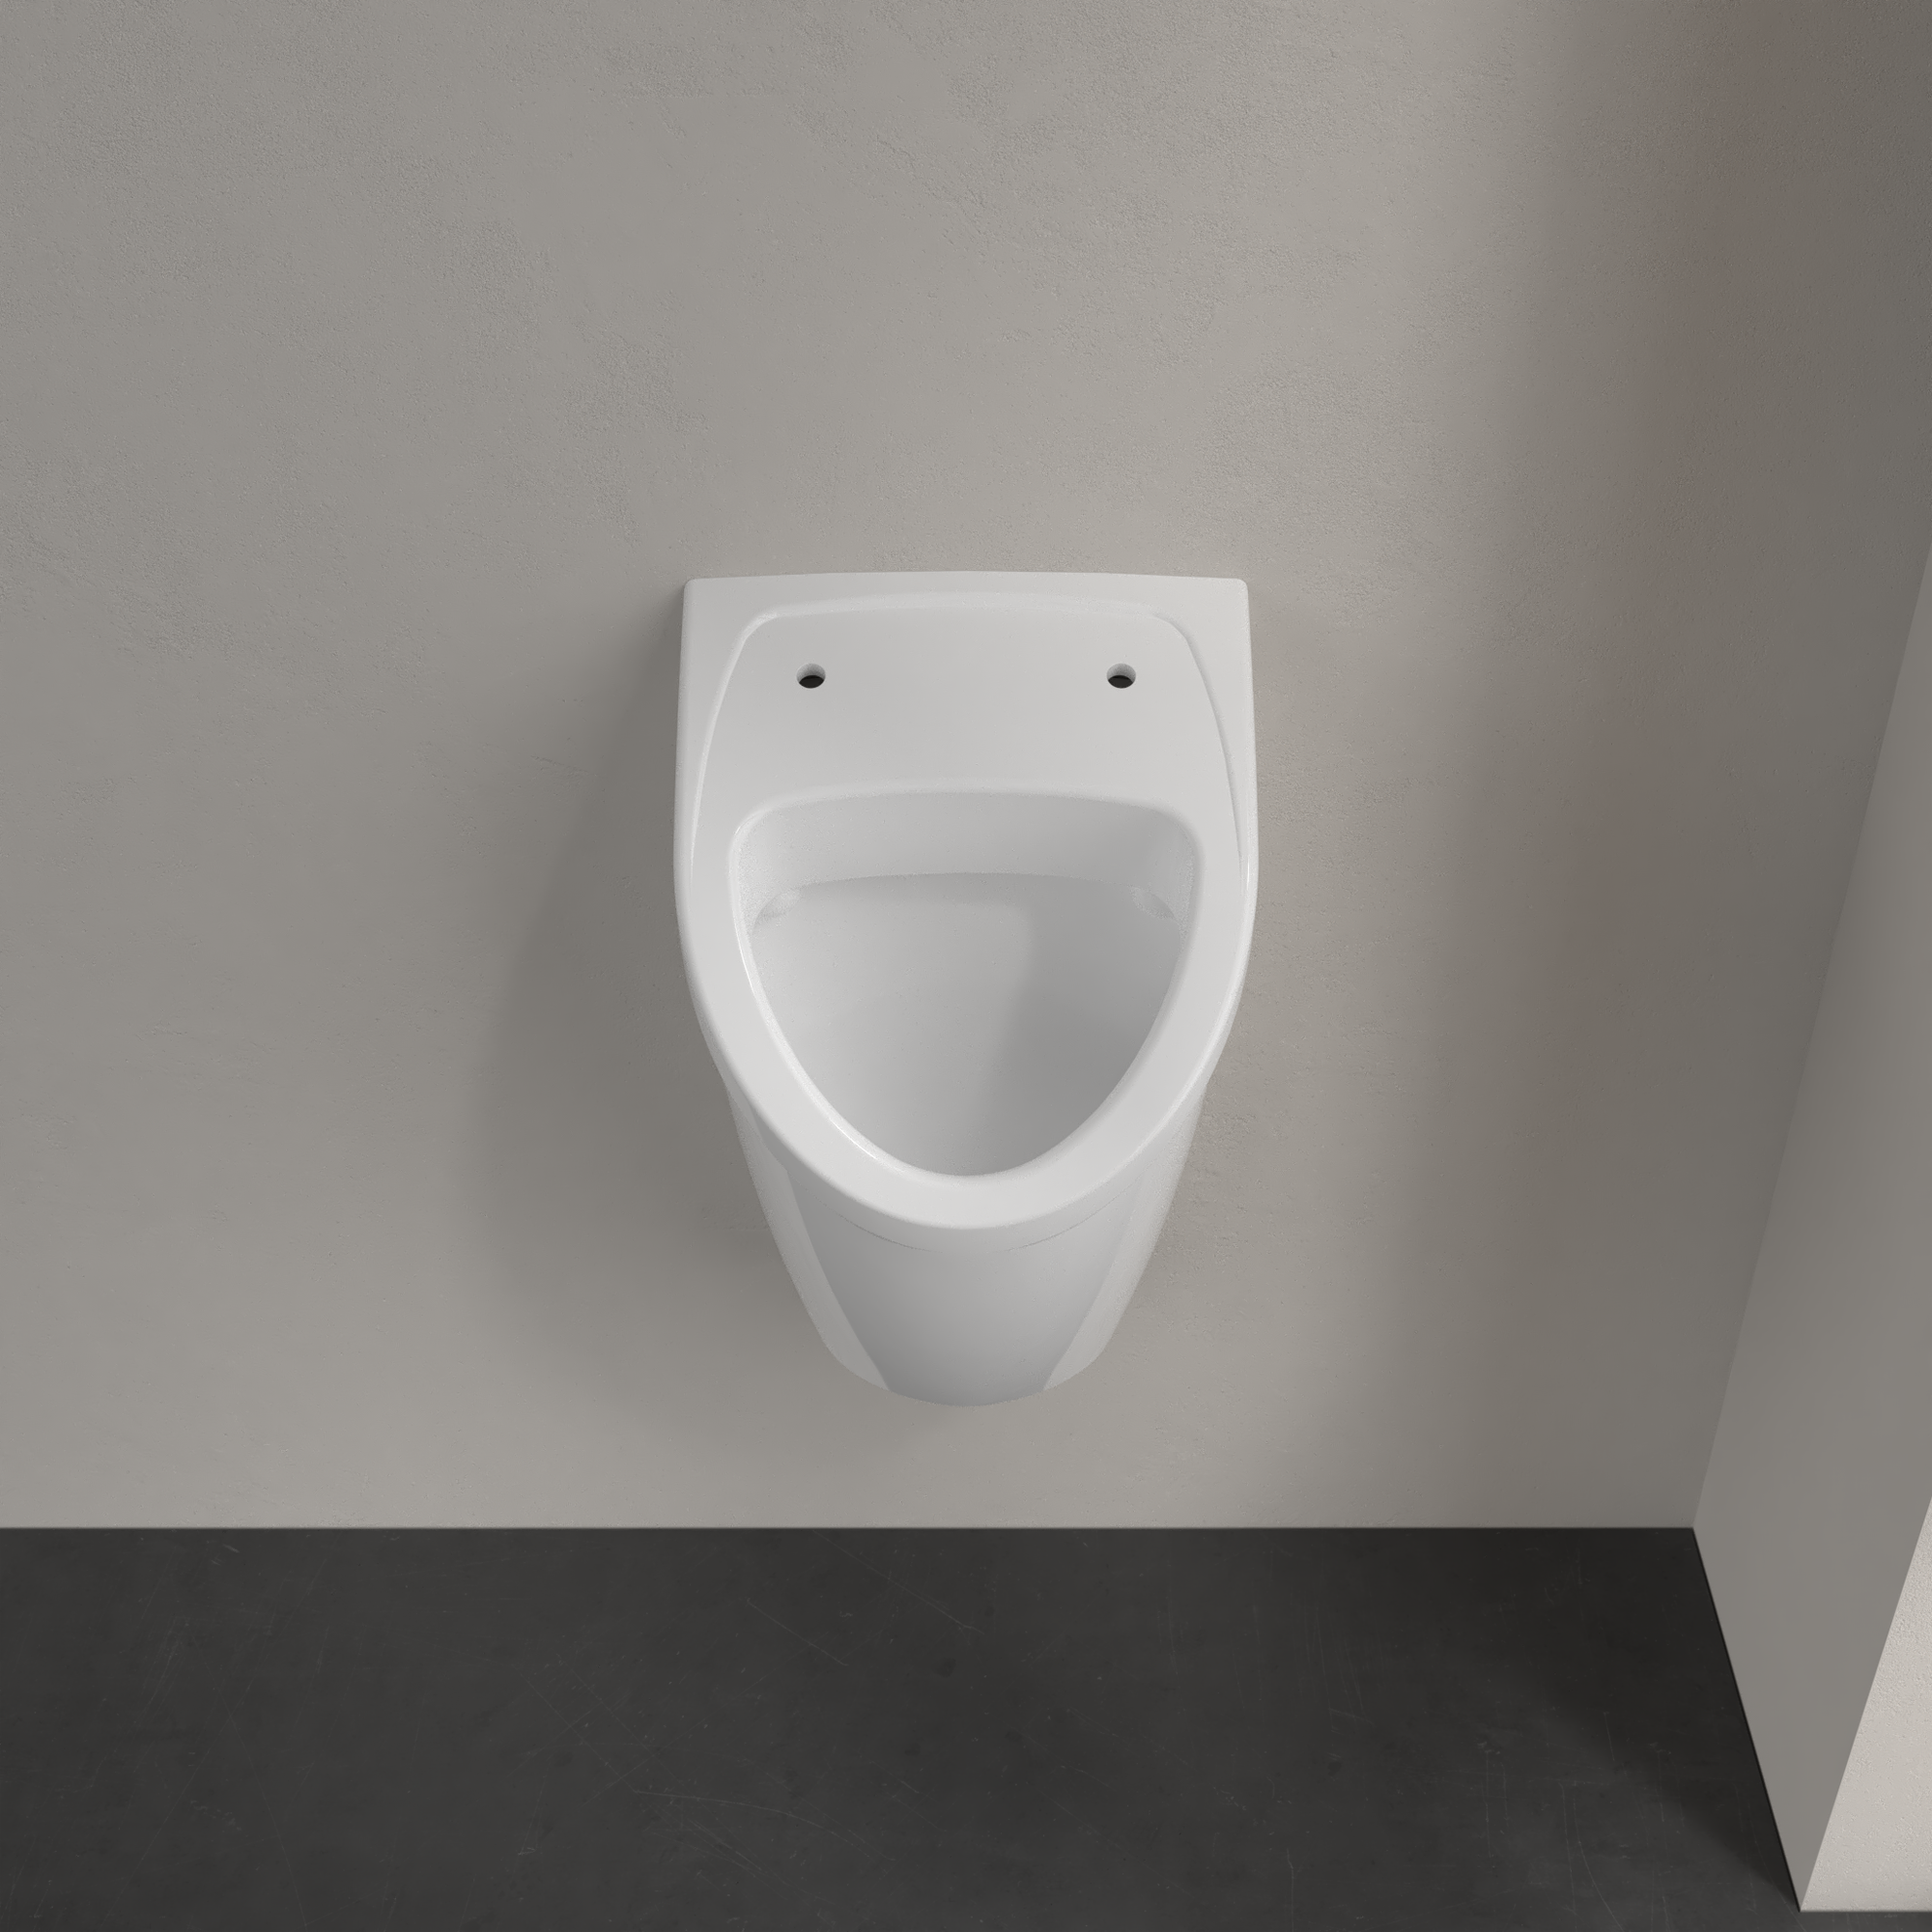 Urinal 'O. Novo' Compact 290 x 495 245 mm + product picture